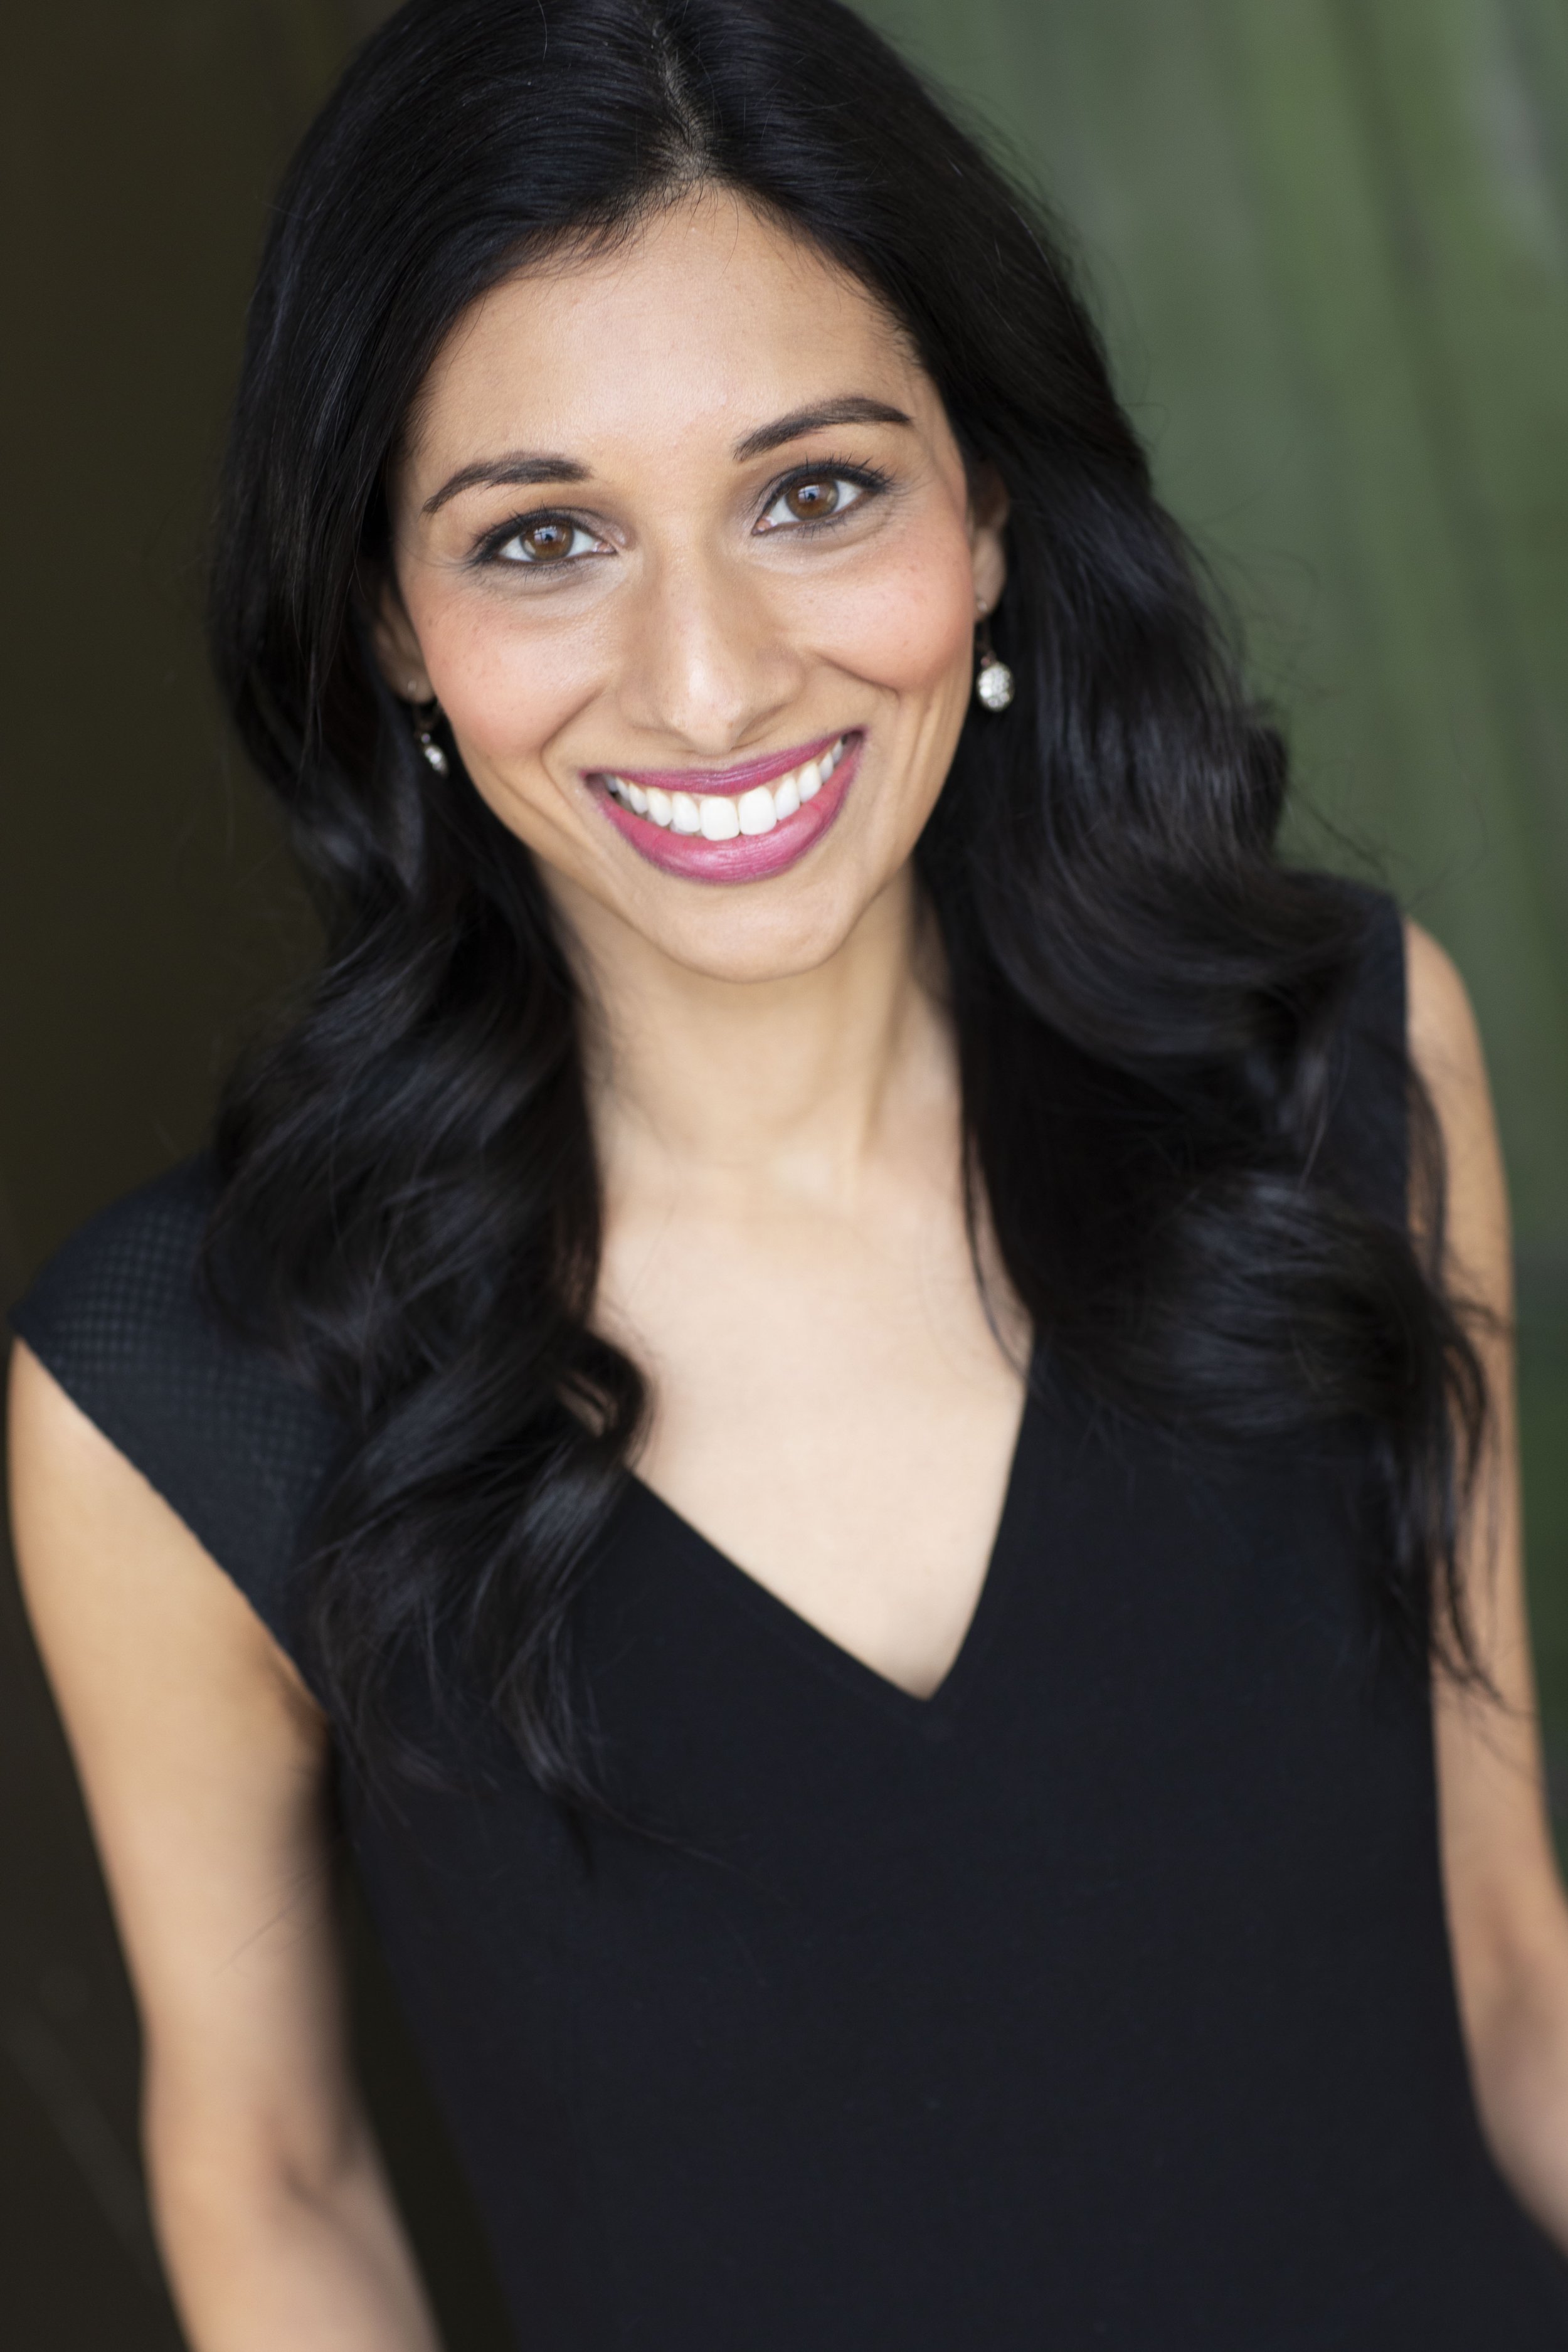  Congratulations to our student Monica who booked a role in a new project!!  Hard work pays off.  Way to go Monica! 